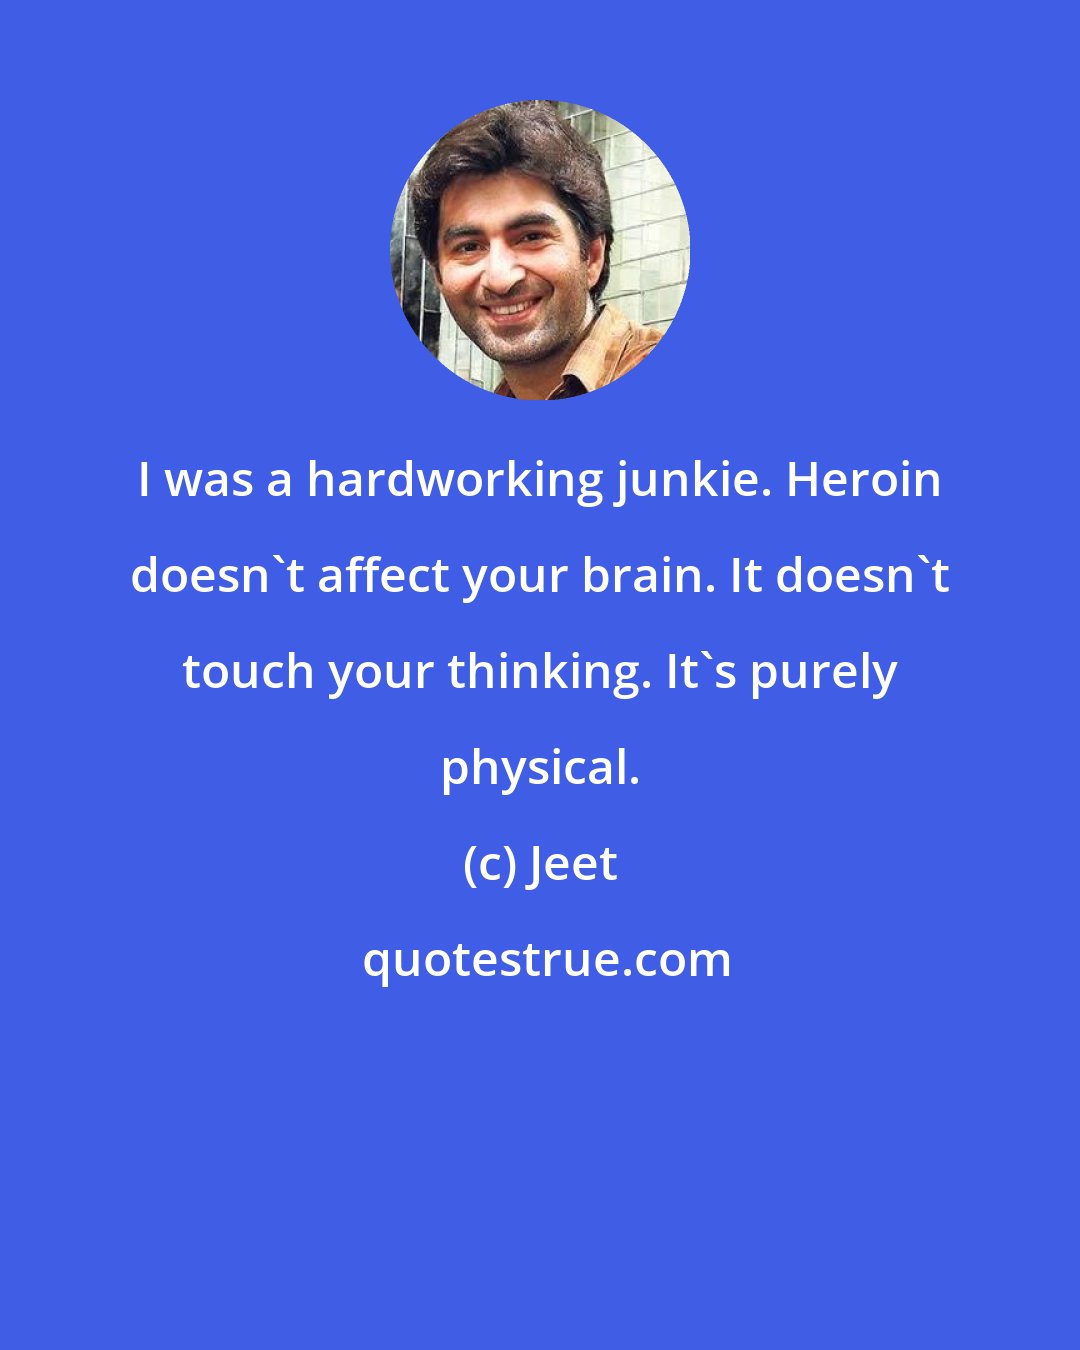 Jeet: I was a hardworking junkie. Heroin doesn't affect your brain. It doesn't touch your thinking. It's purely physical.